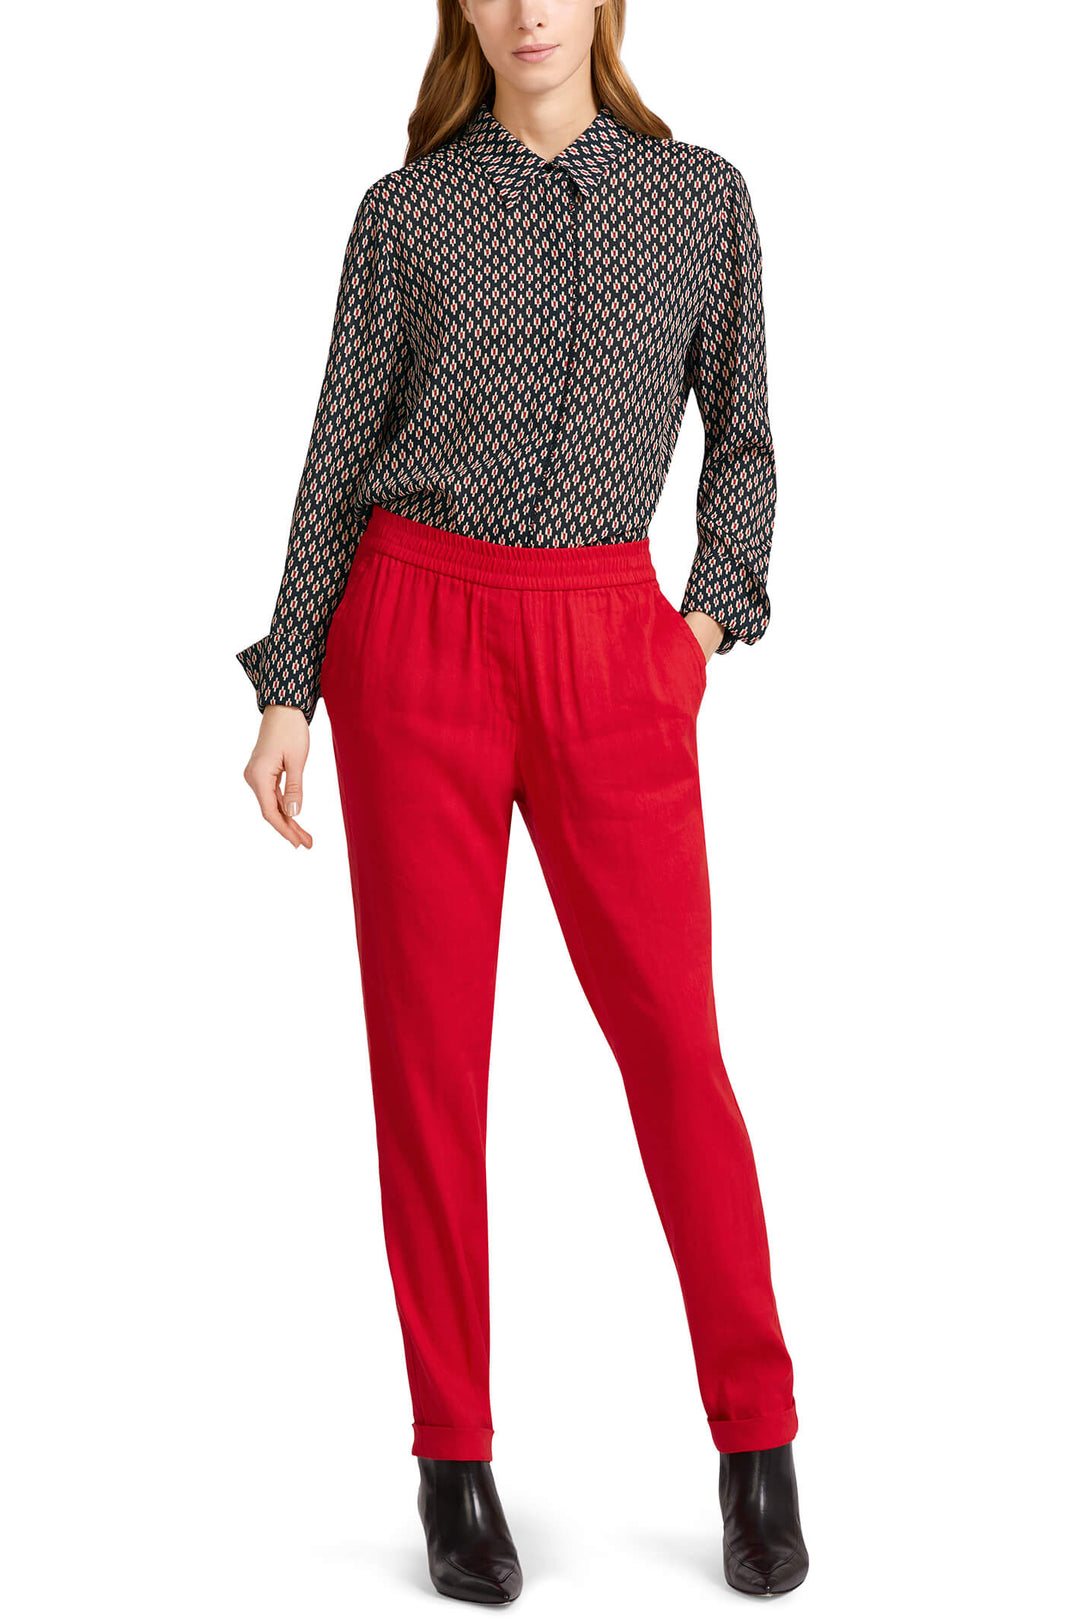 Marc Cain Collection UC 81.59 W47 Deep Red Vacation Vibes Trousers - Olivia Grace Fashion